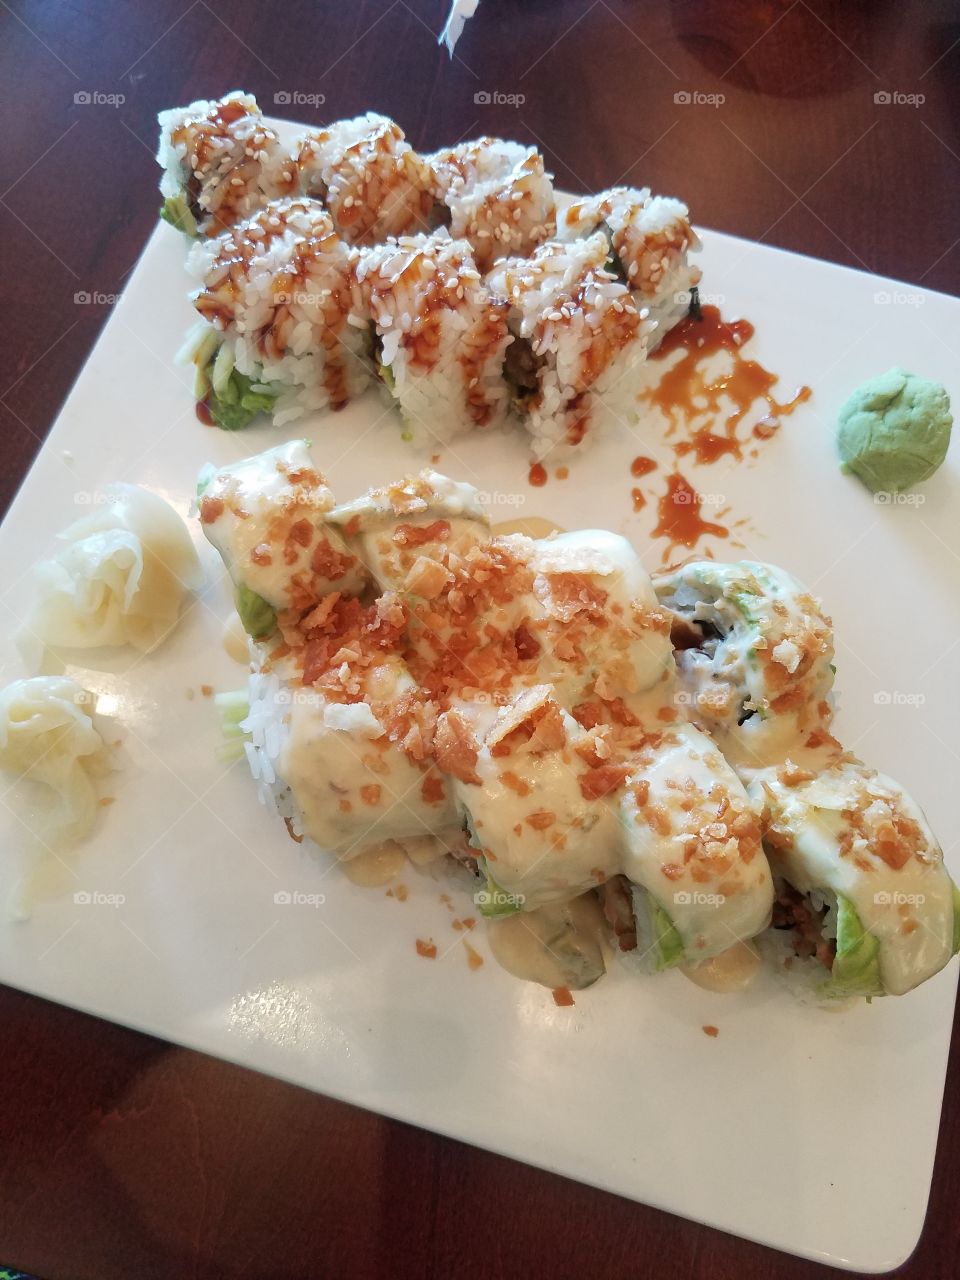 solving the world's problem,  one sushi roll at a time.